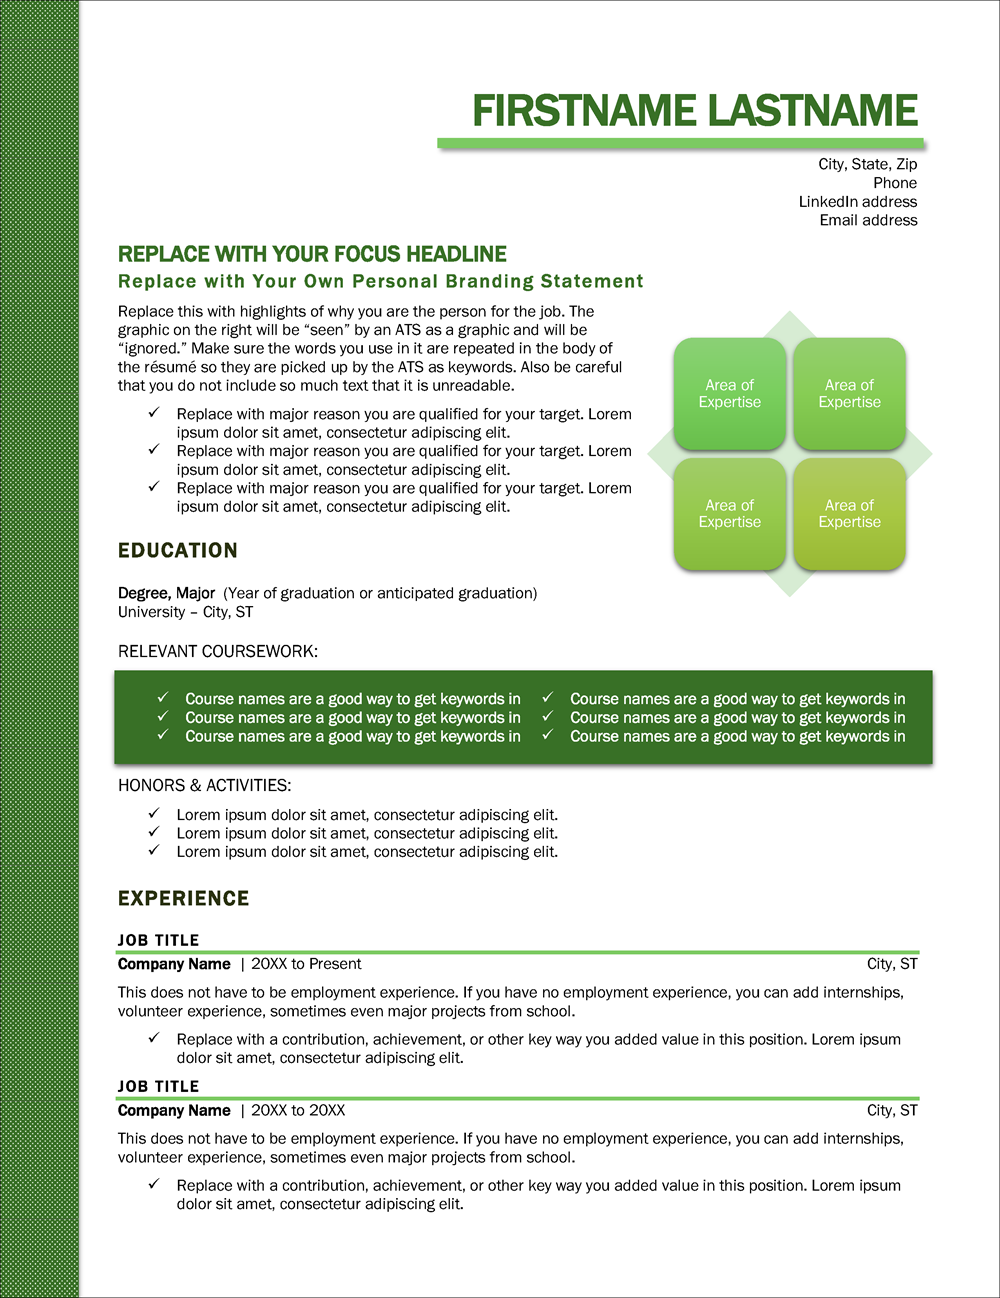 Resume Template for Graduating Students